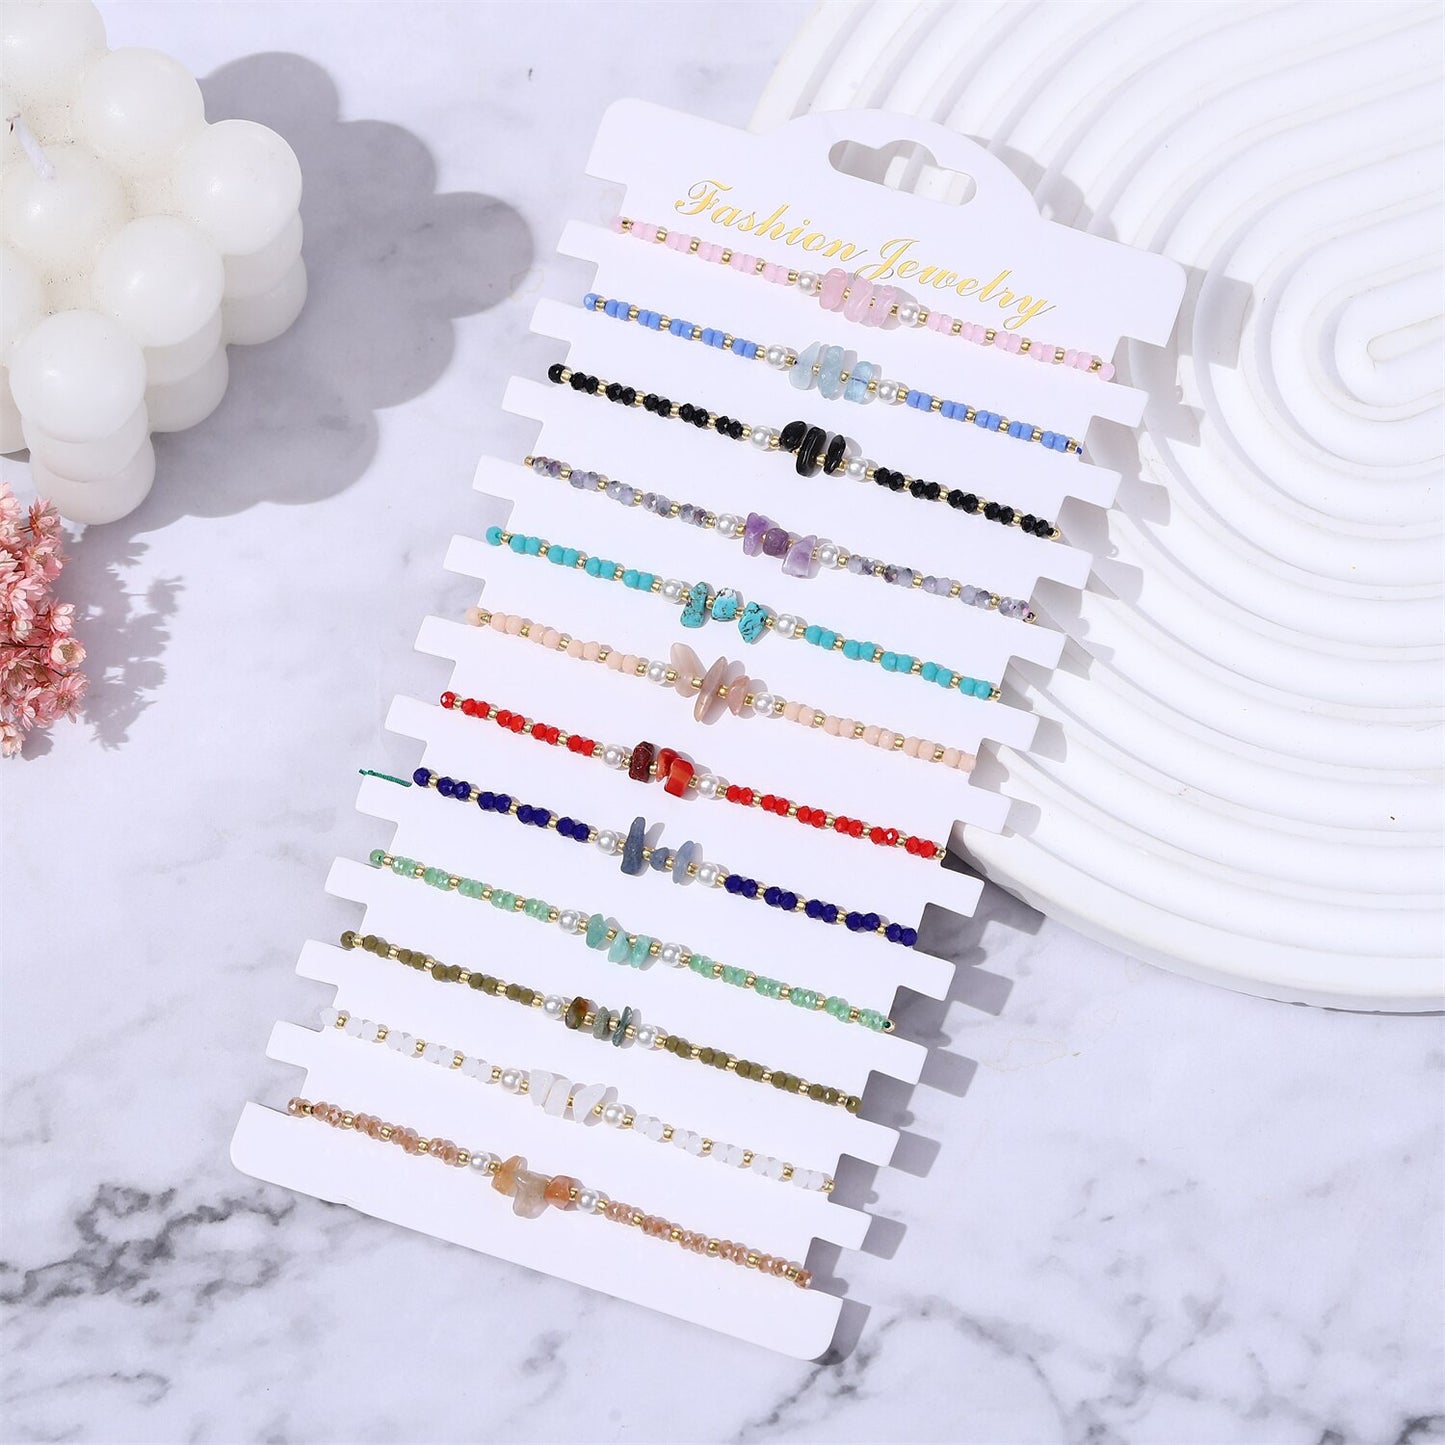 12Pcs Seed Beads Natural Stone Charms Bracelets Adjustable String Wish Bracelets Jewelry Gifts for Girls Wholesale